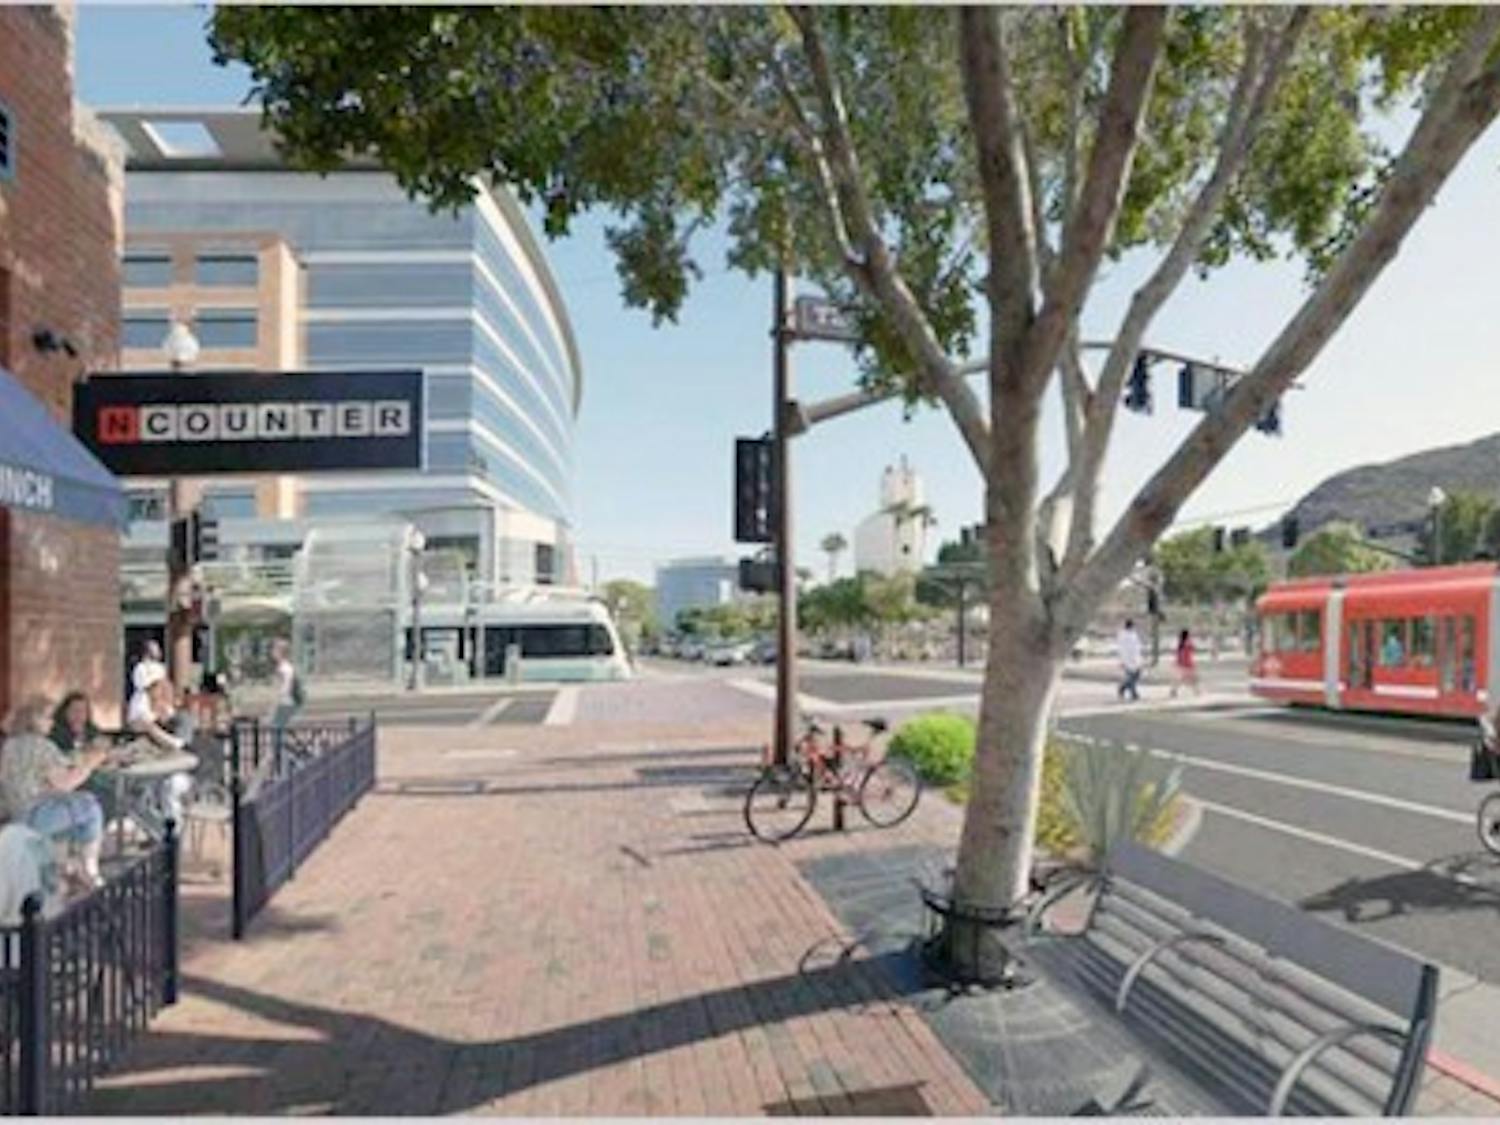 A rendering shows what the future Tempe streetcar will look like running down Mill Avenue. (Photo courtesy of Valley Metro)